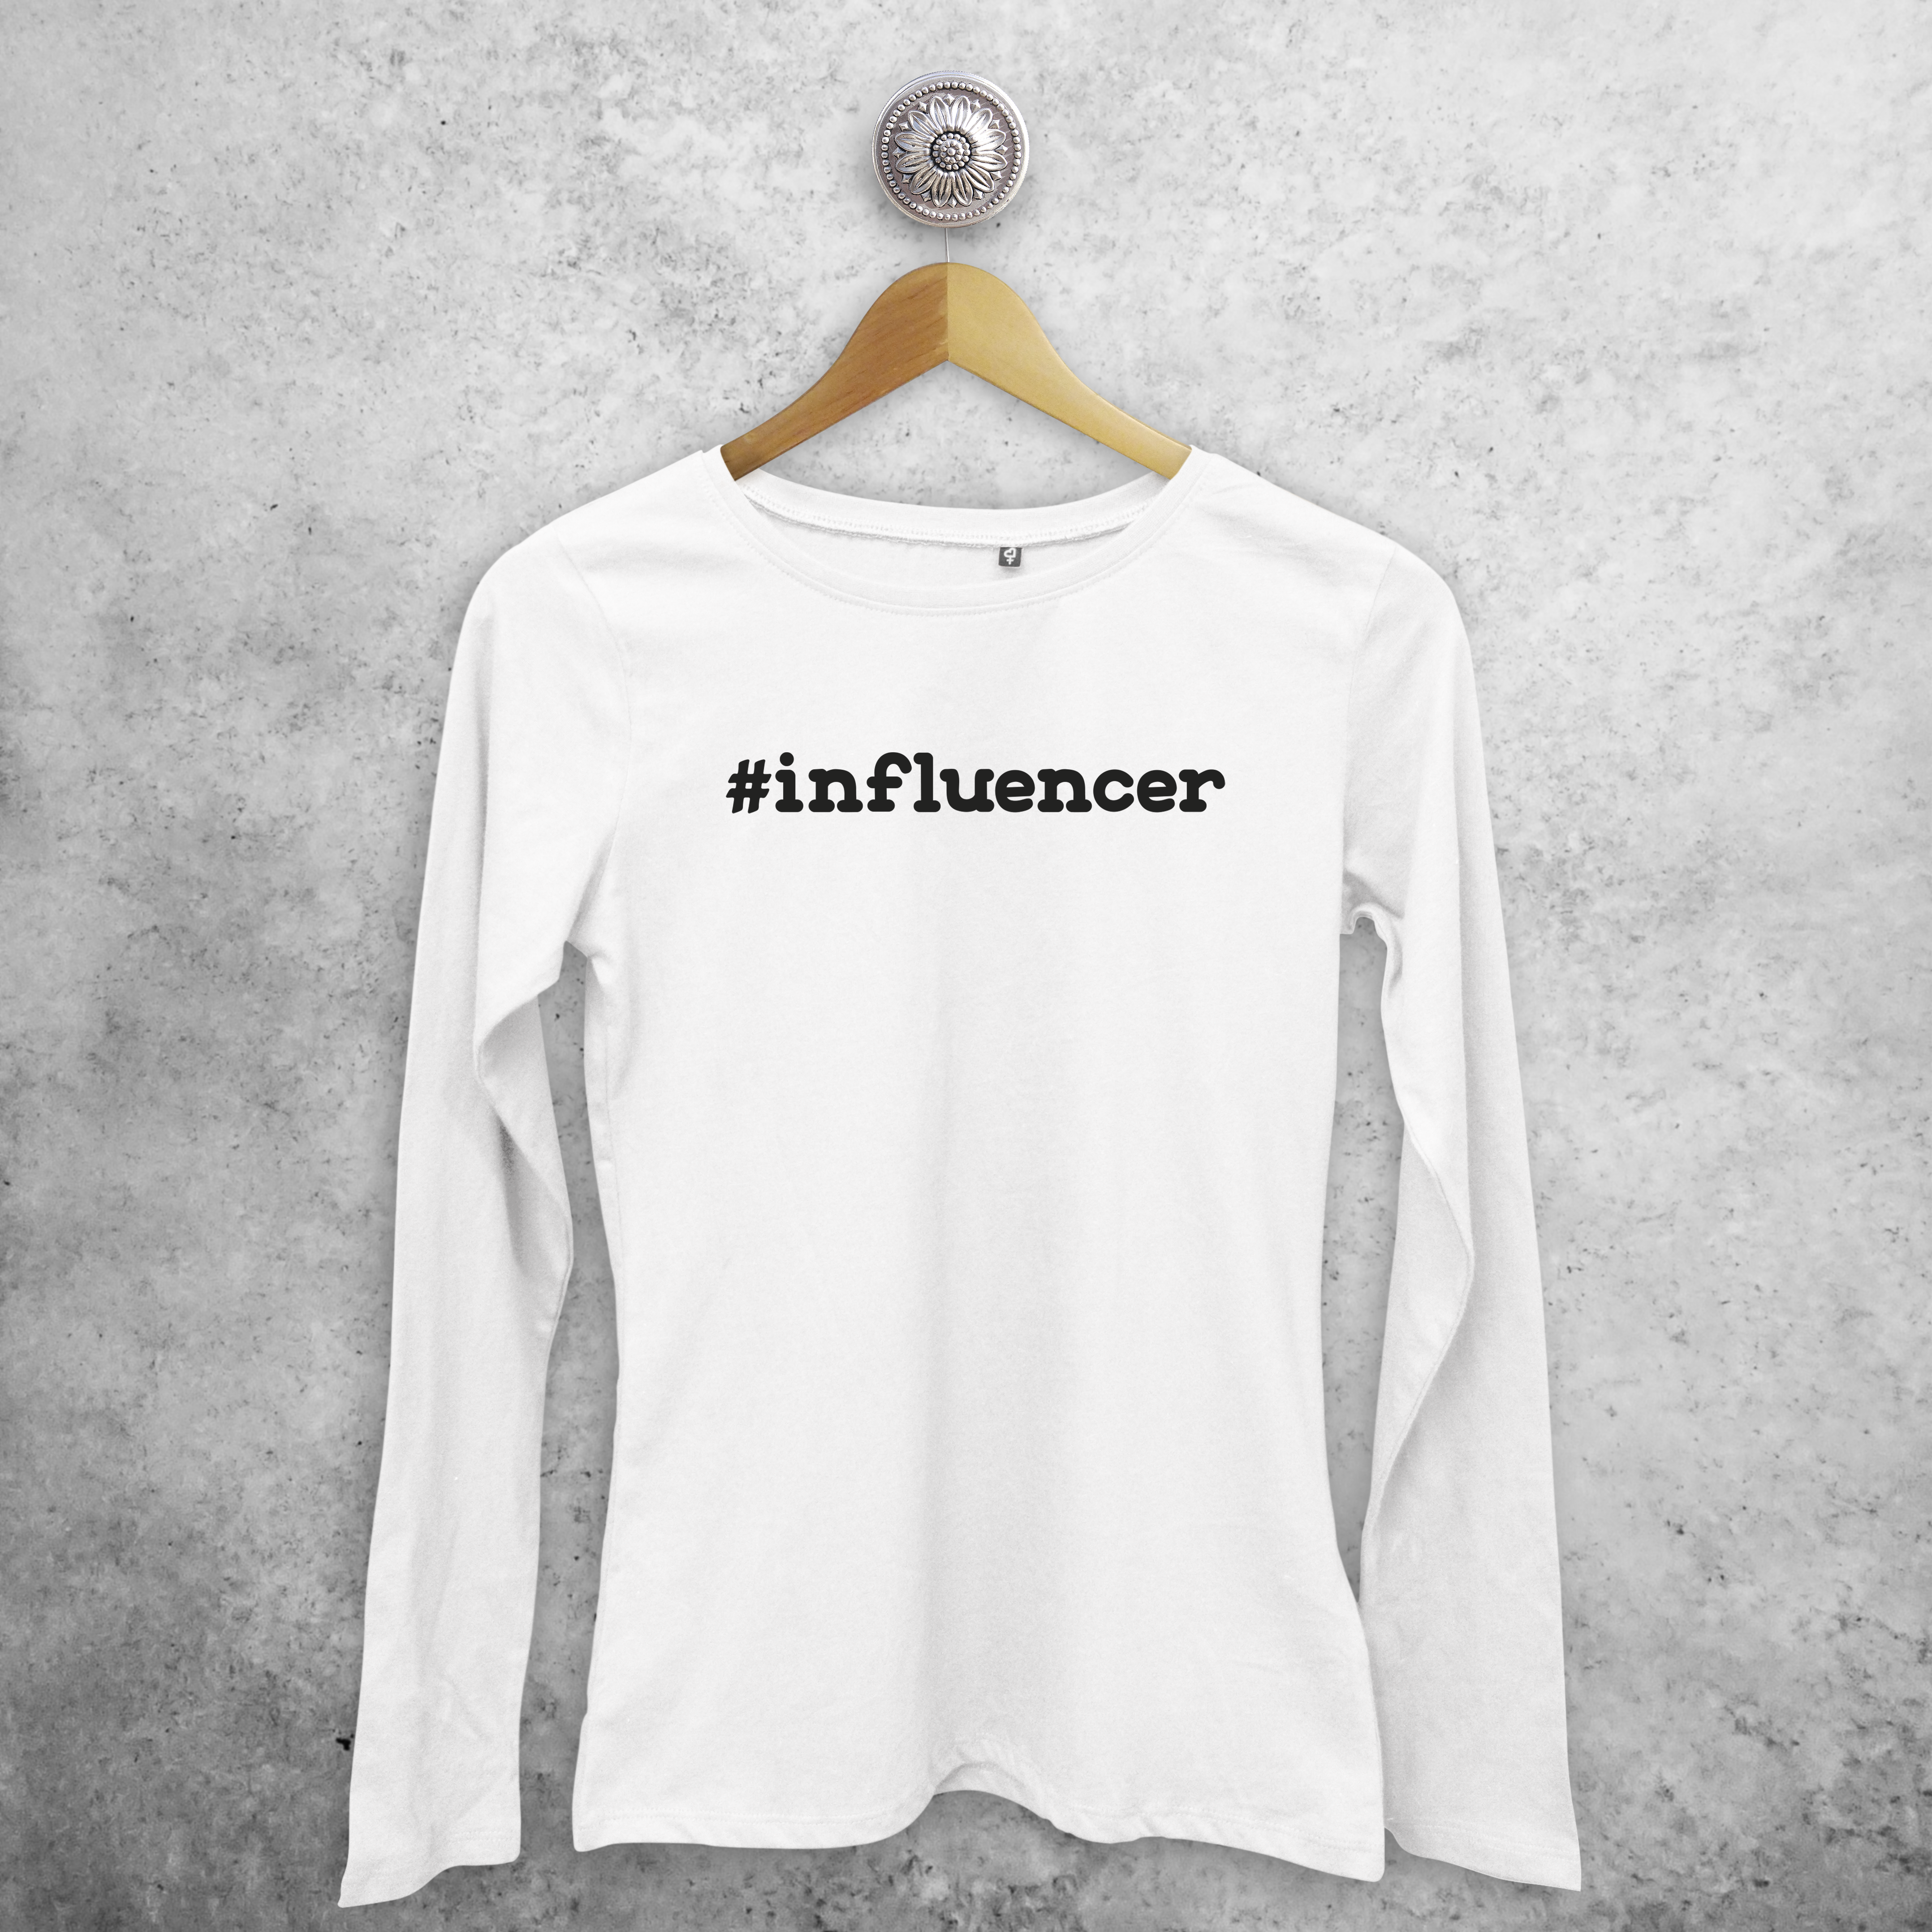 Adult shirt with long sleeves, with '#influencer' print by KMLeon.